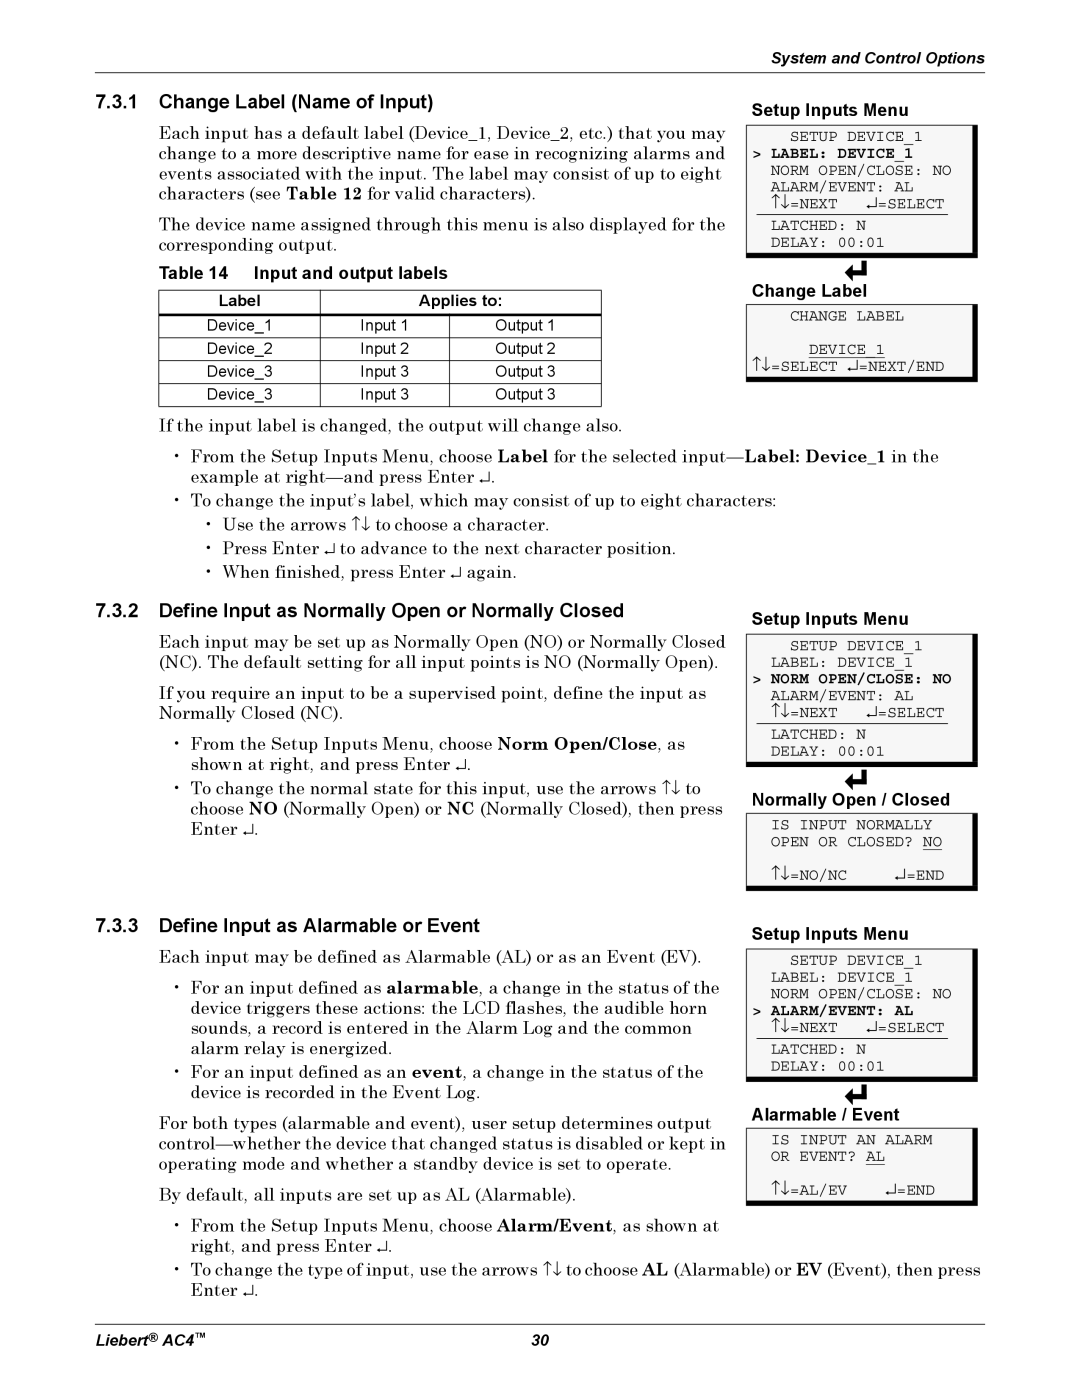 Emerson AC4 user manual Change Label Name of Input, 7.3.3Define Input as Alarmable or Event, Input and output labels 